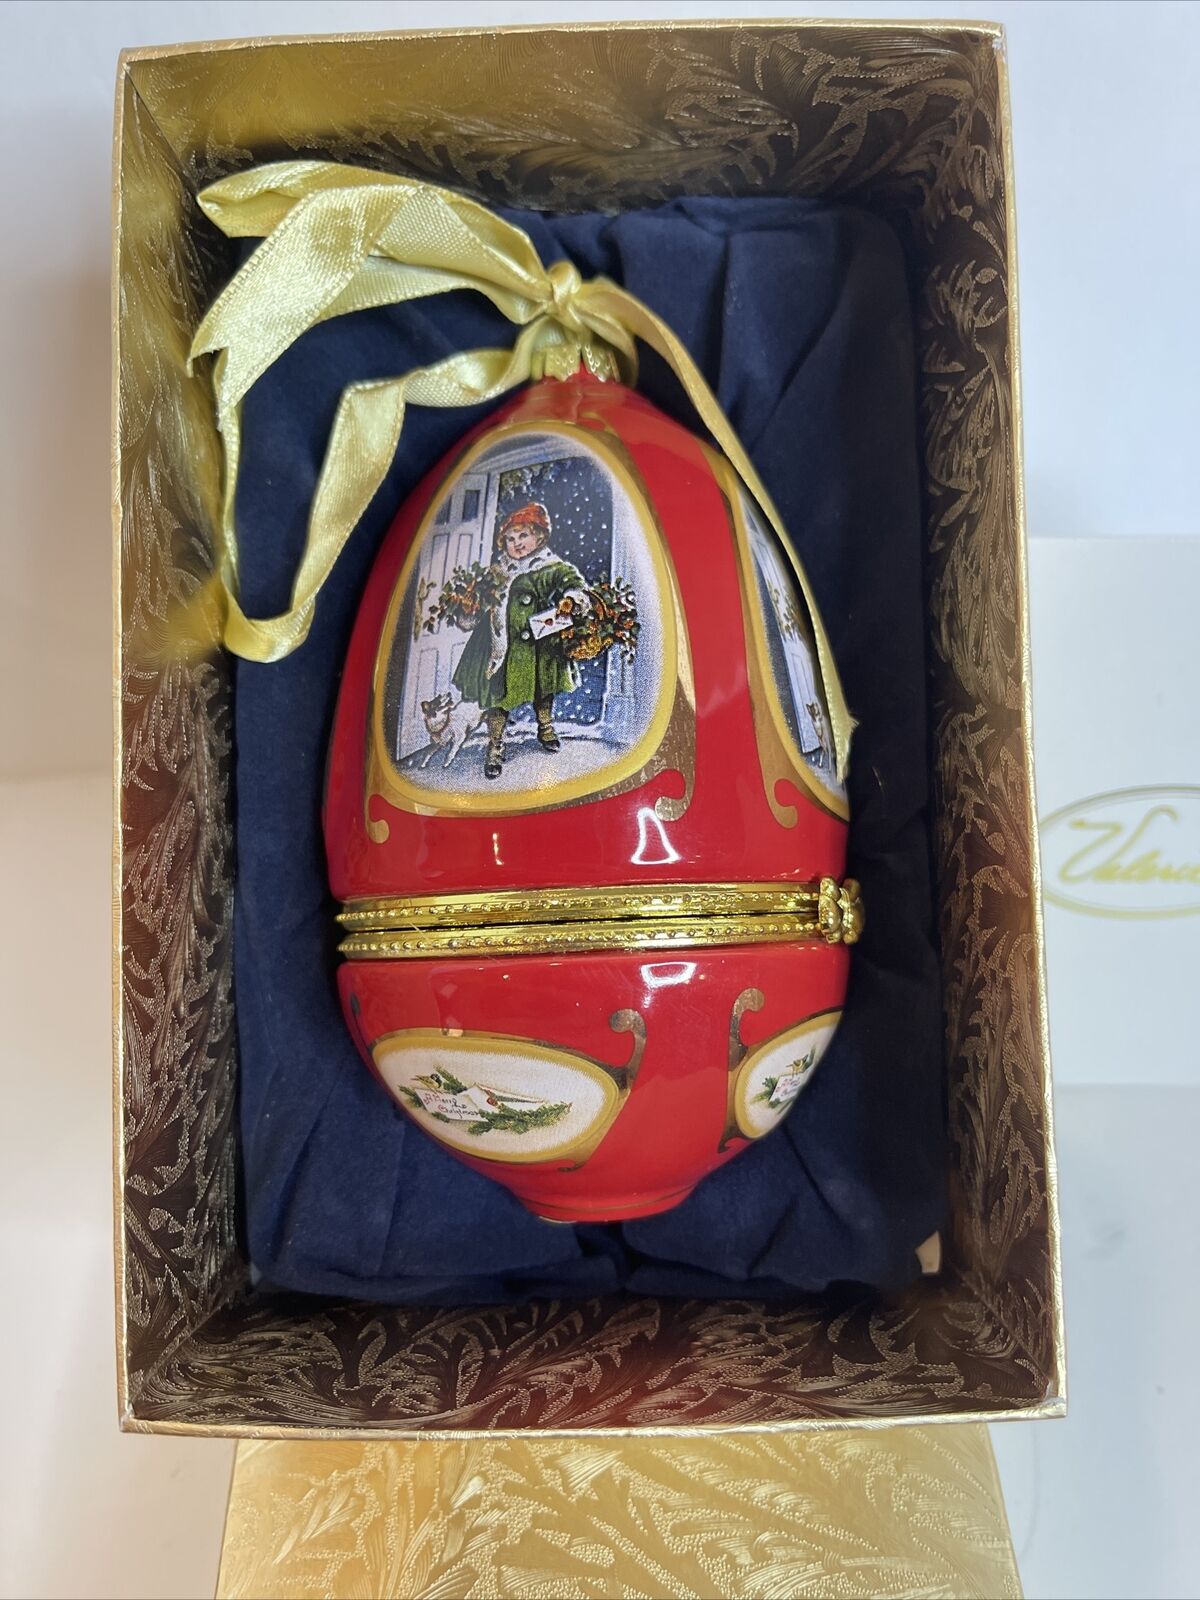 2006 Mr Christmas Musical Egg Trinket Box Ornament The Wholly And The Ivy Boxed